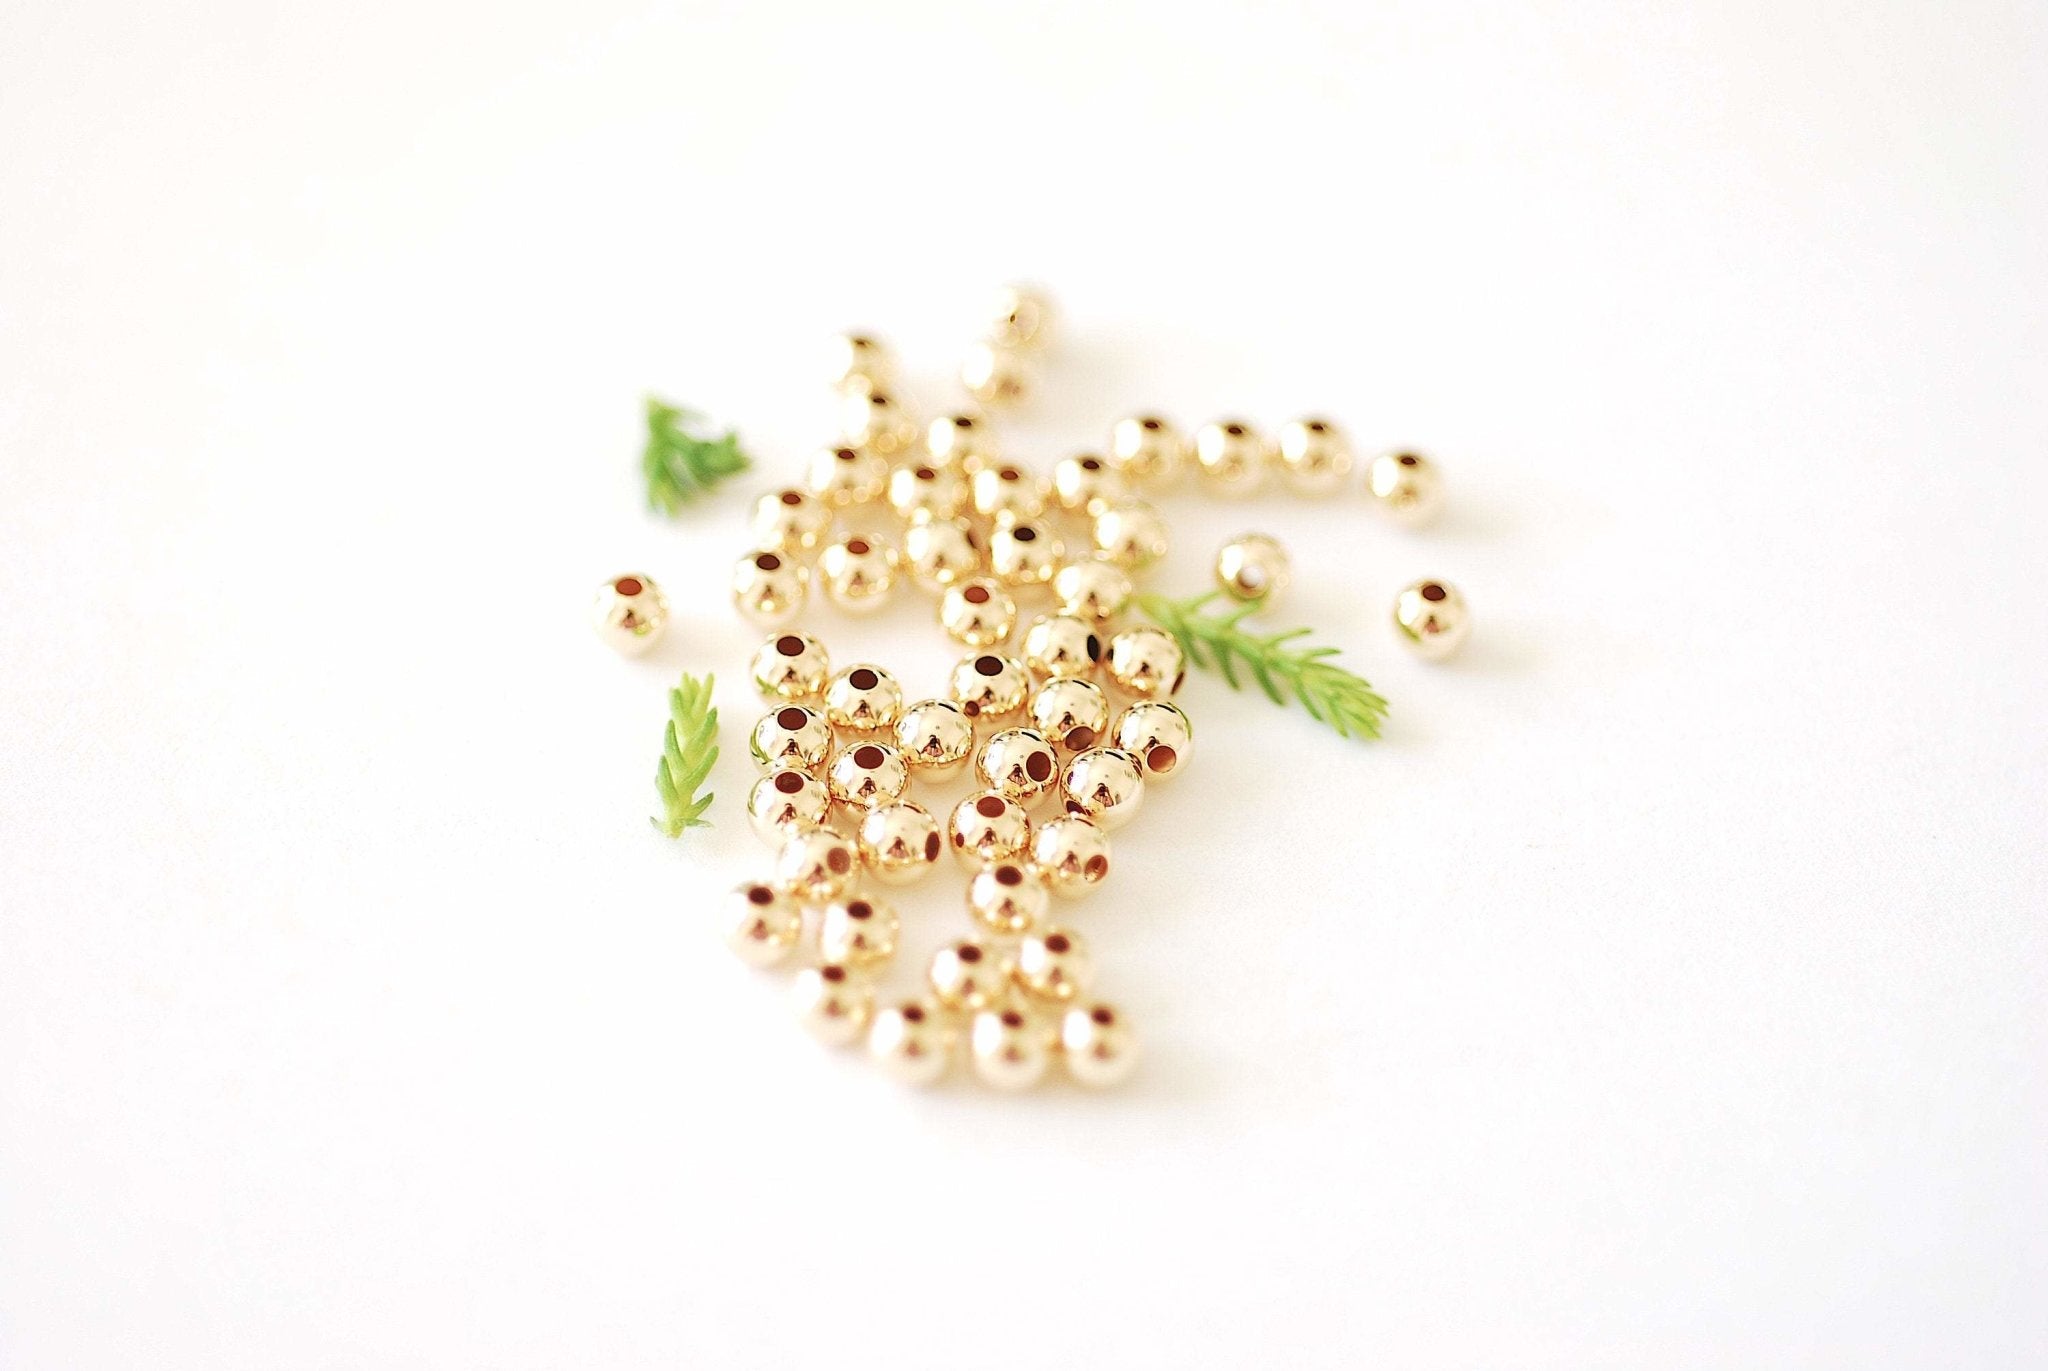 8.0mm Bead Gold-Filled 1.5mm Hole, (10 Pack) Wholesale Jewelry Making Beads - HarperCrown